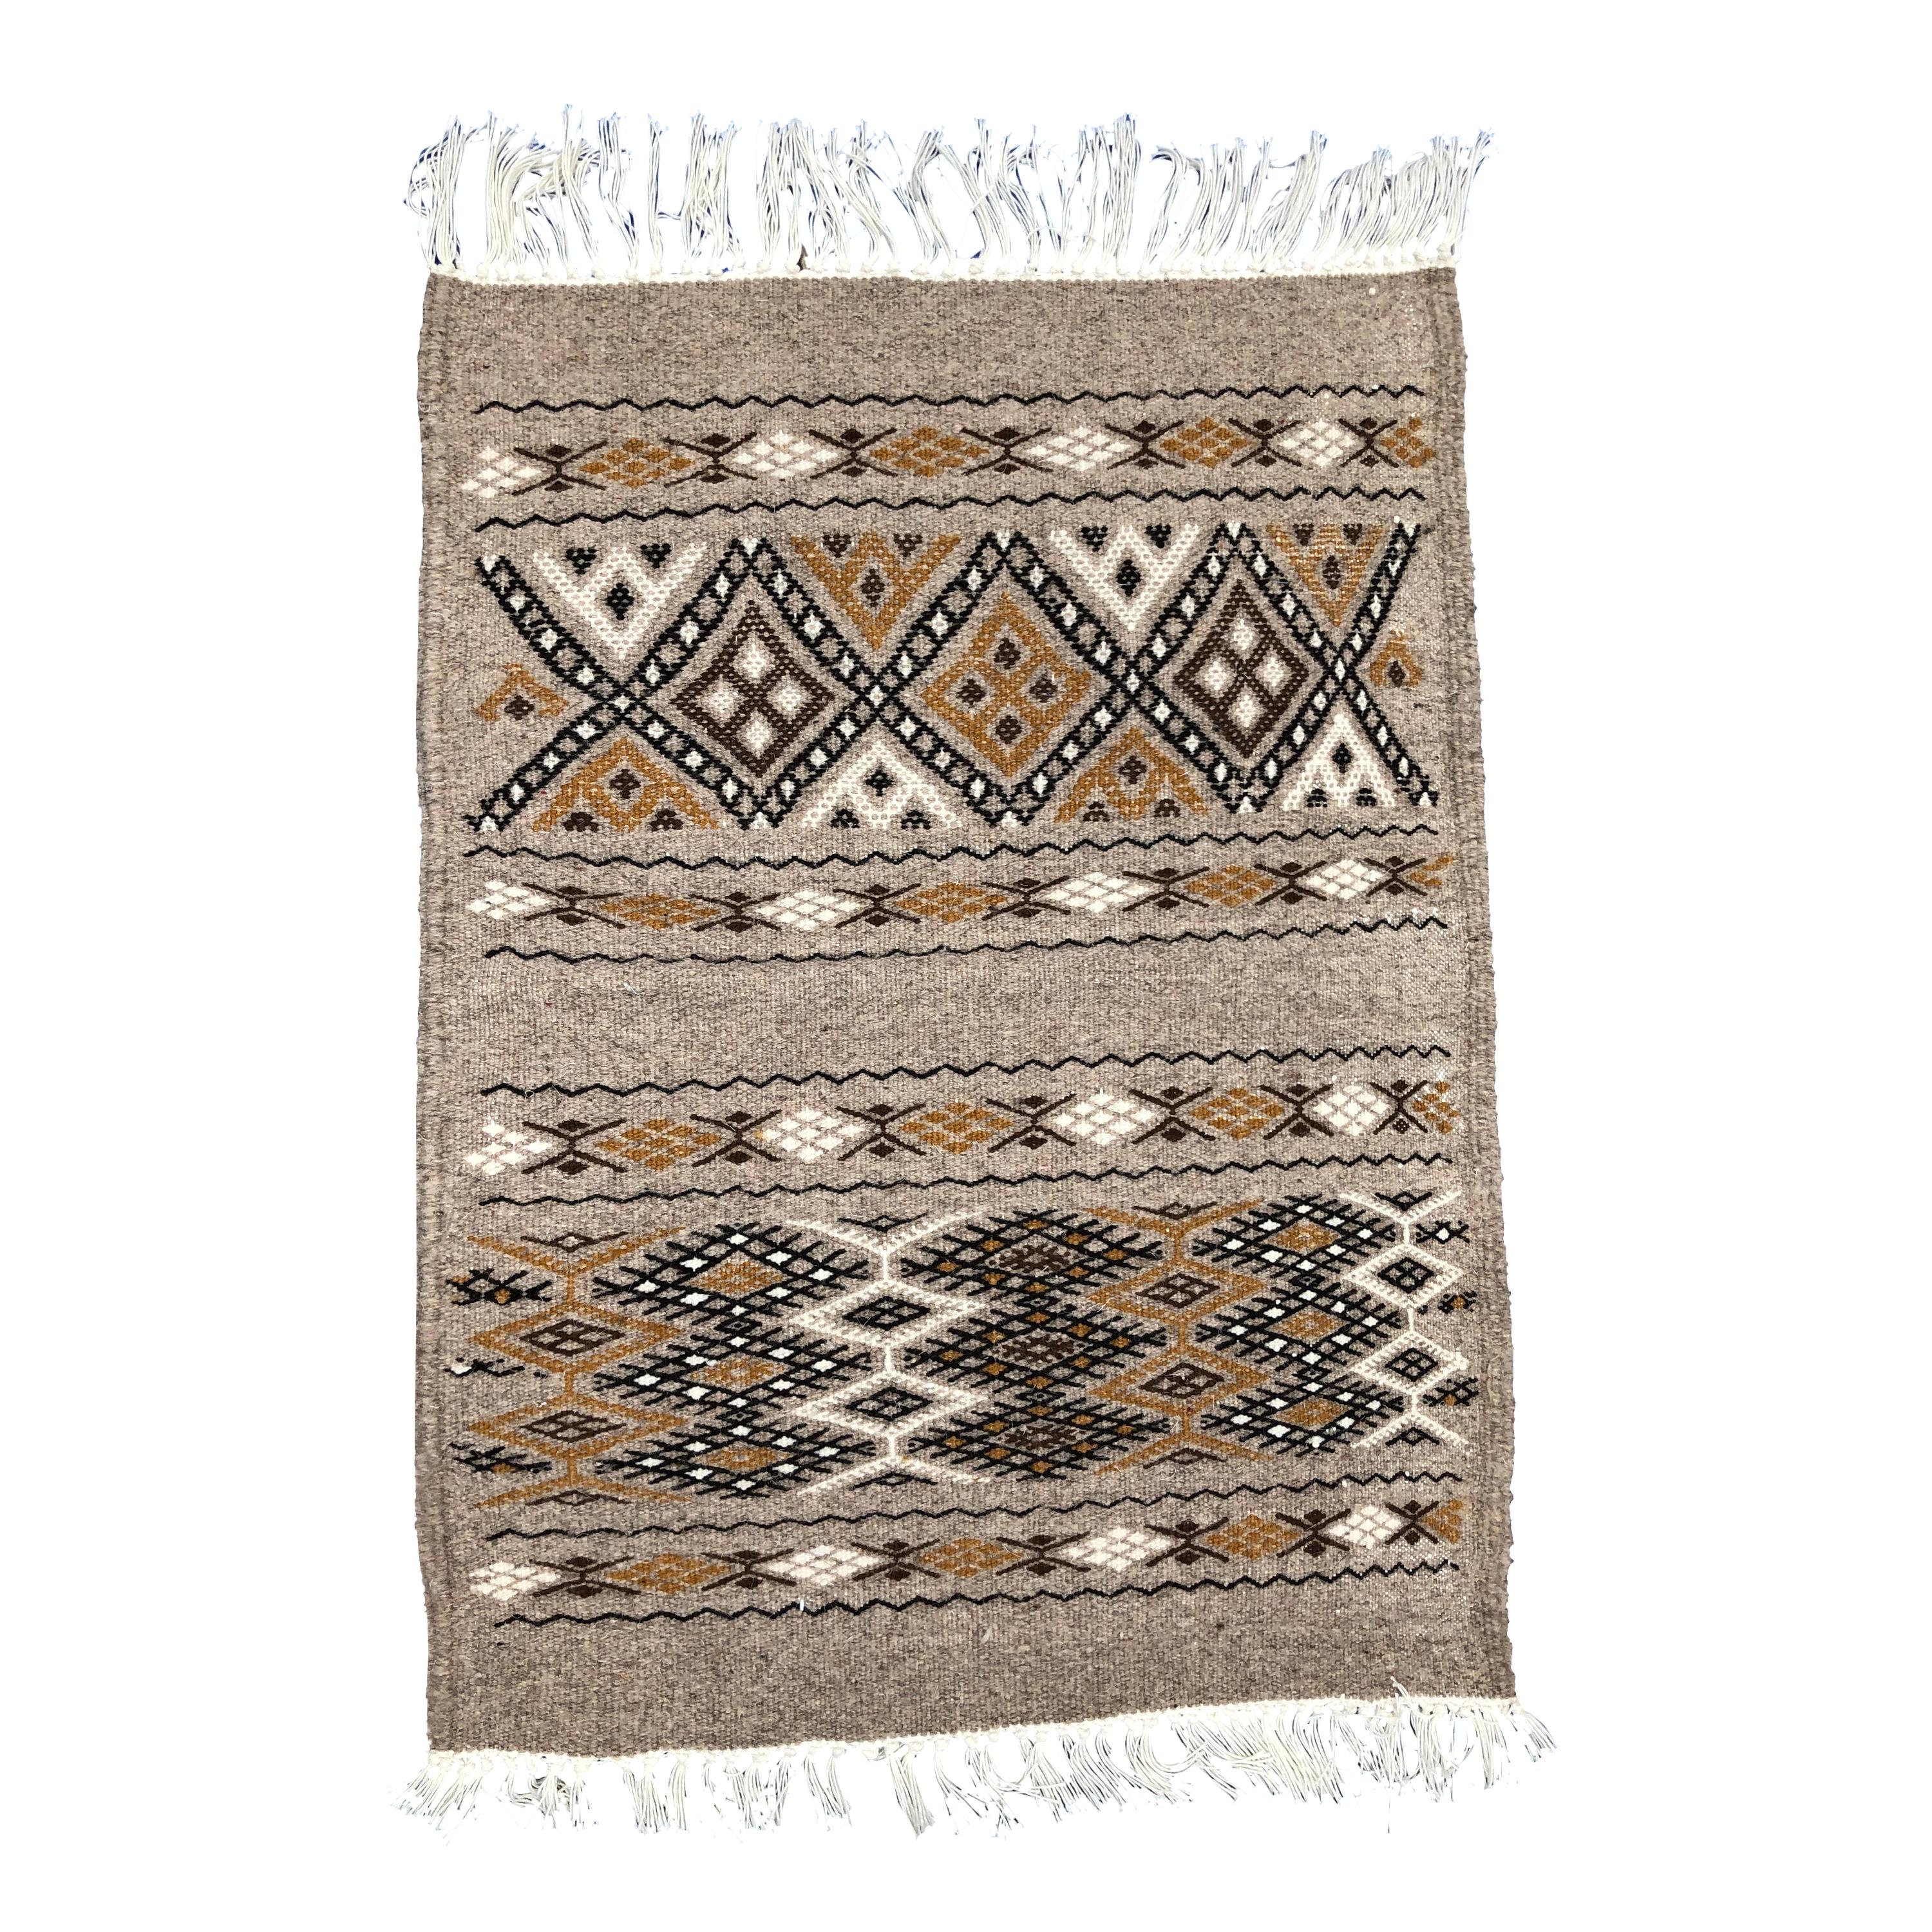 Hand-Loomed Berber Natural Wool Tribal Accent Rug, Neutral Tan and Brown For Sale